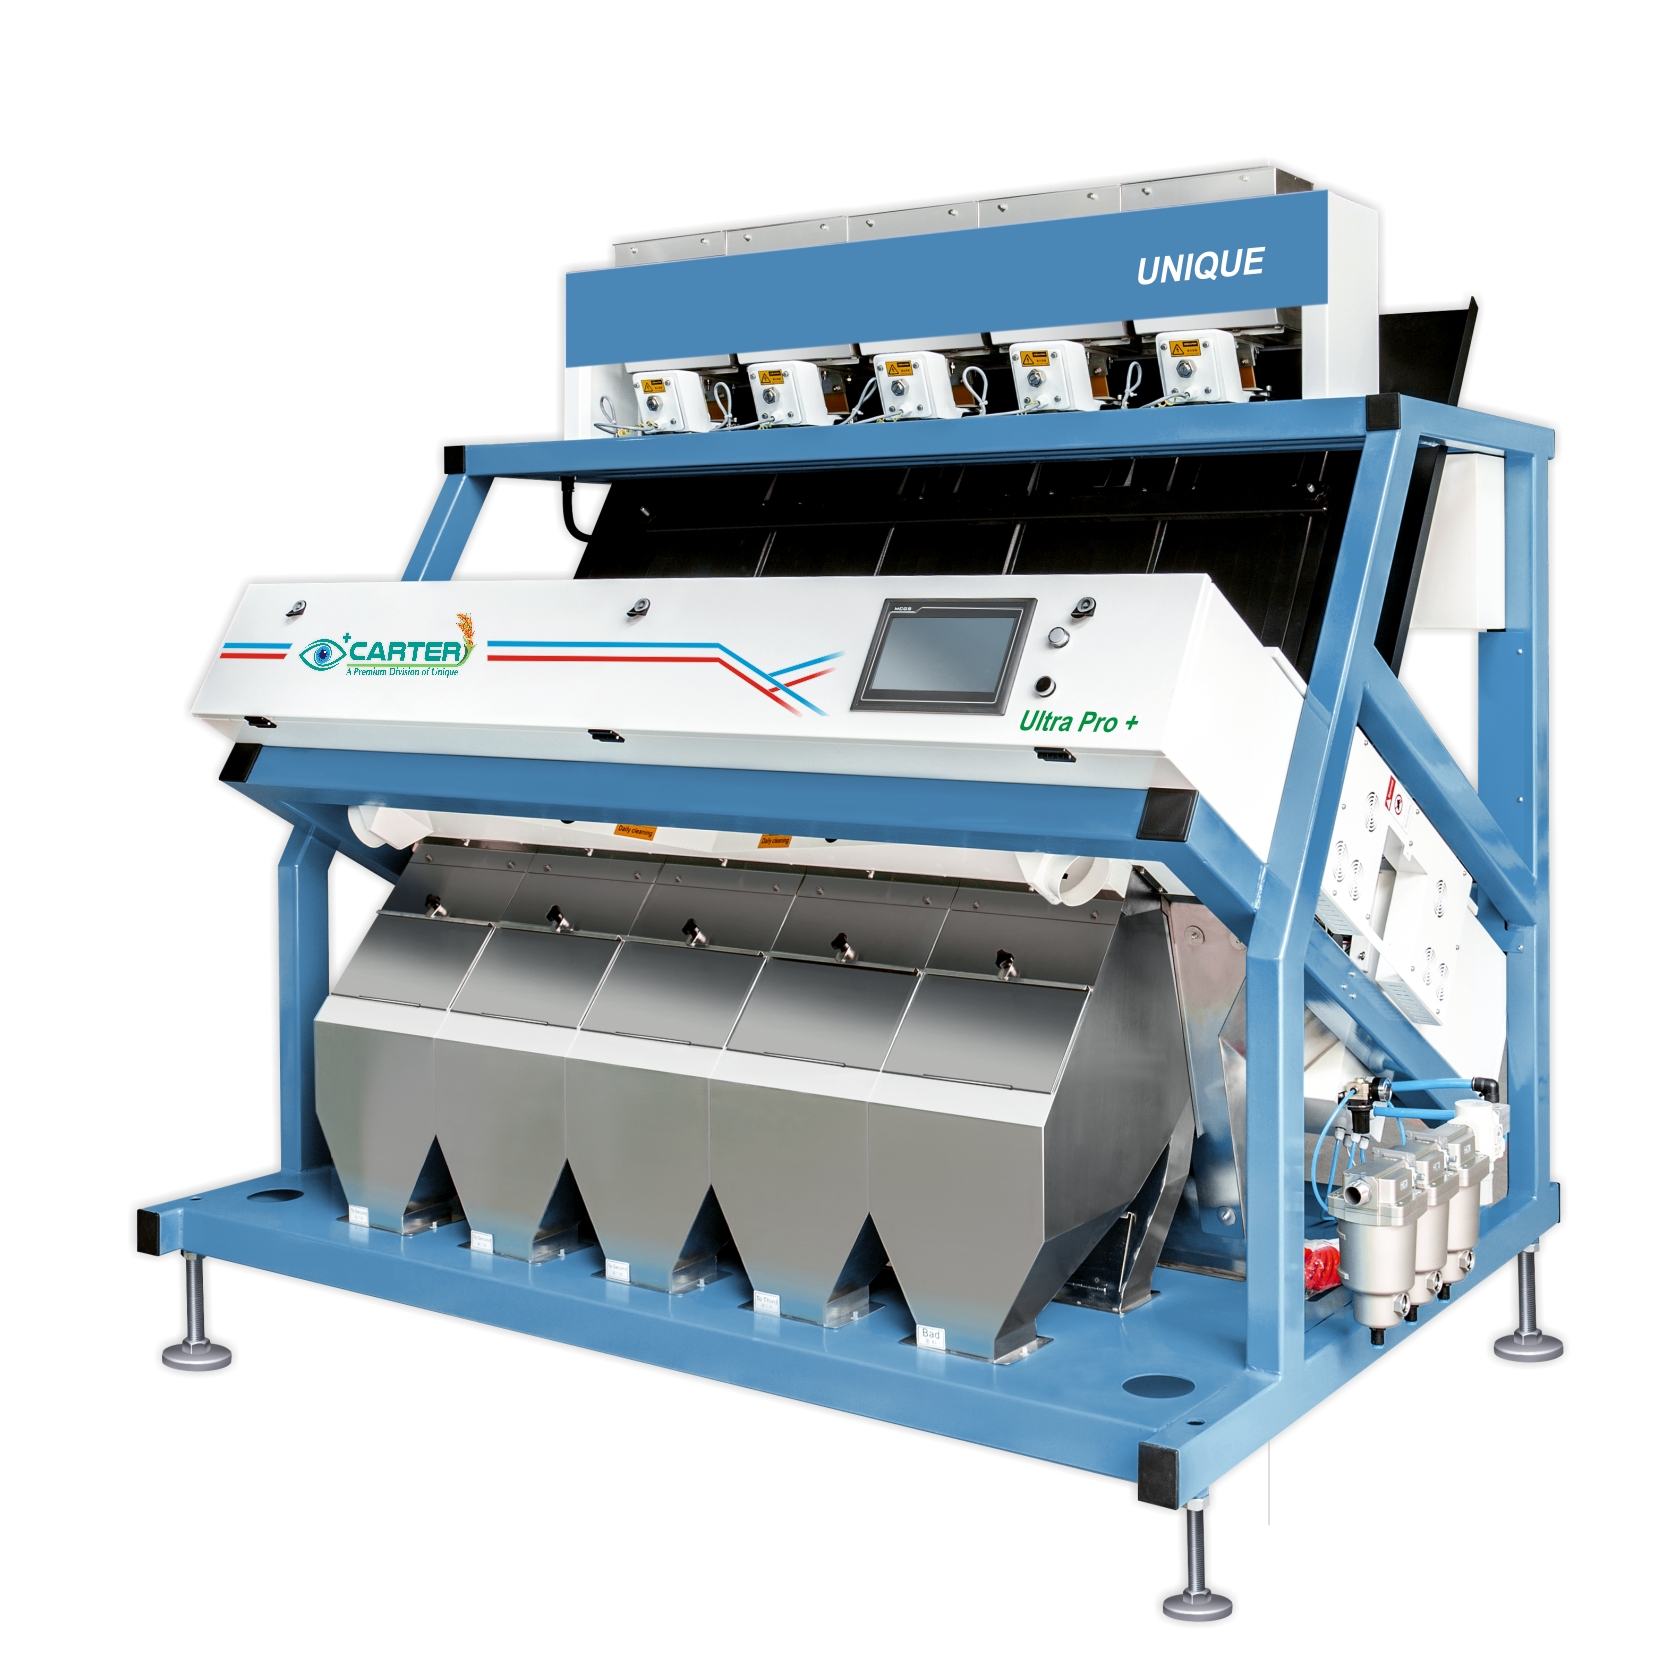 Dried fruit processing: optical sorting machines